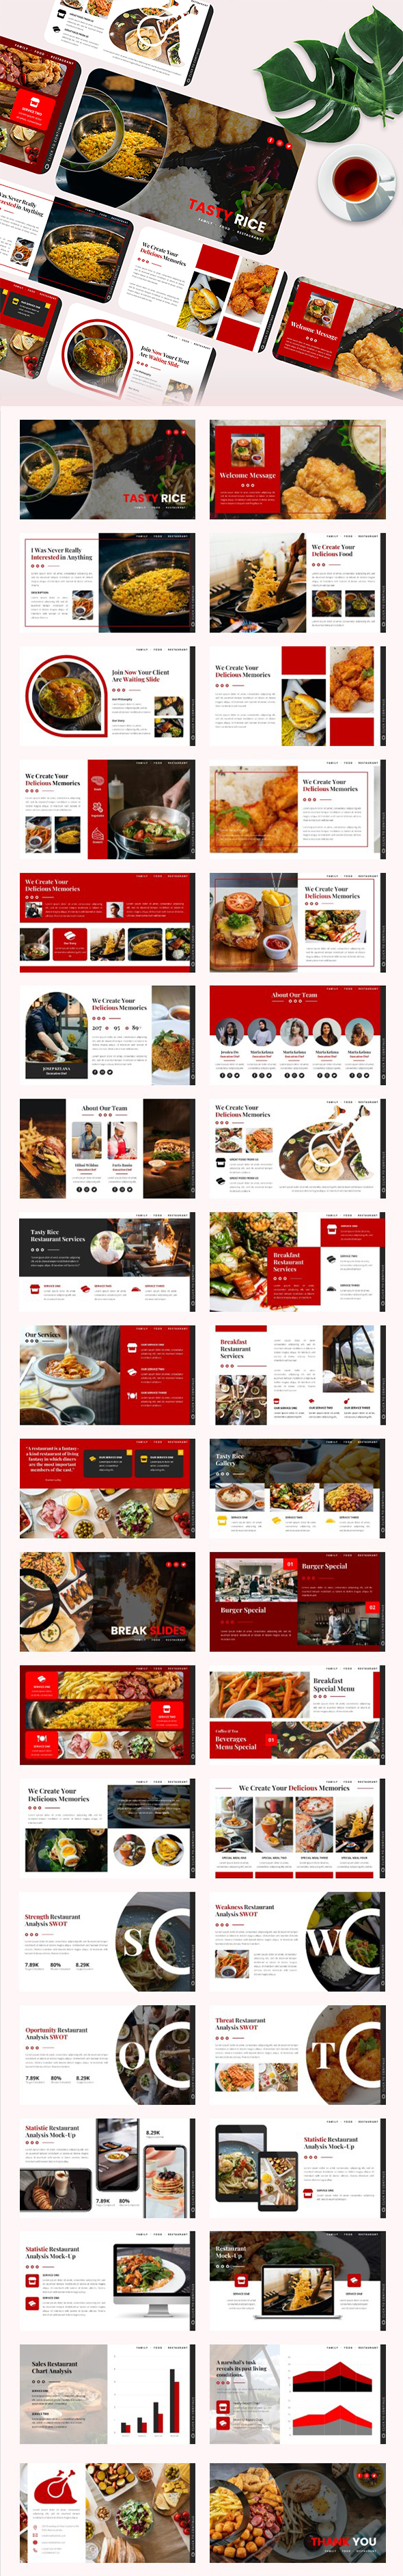 [DOWNLOAD]Tasty Rice - Food PowerPoint Template